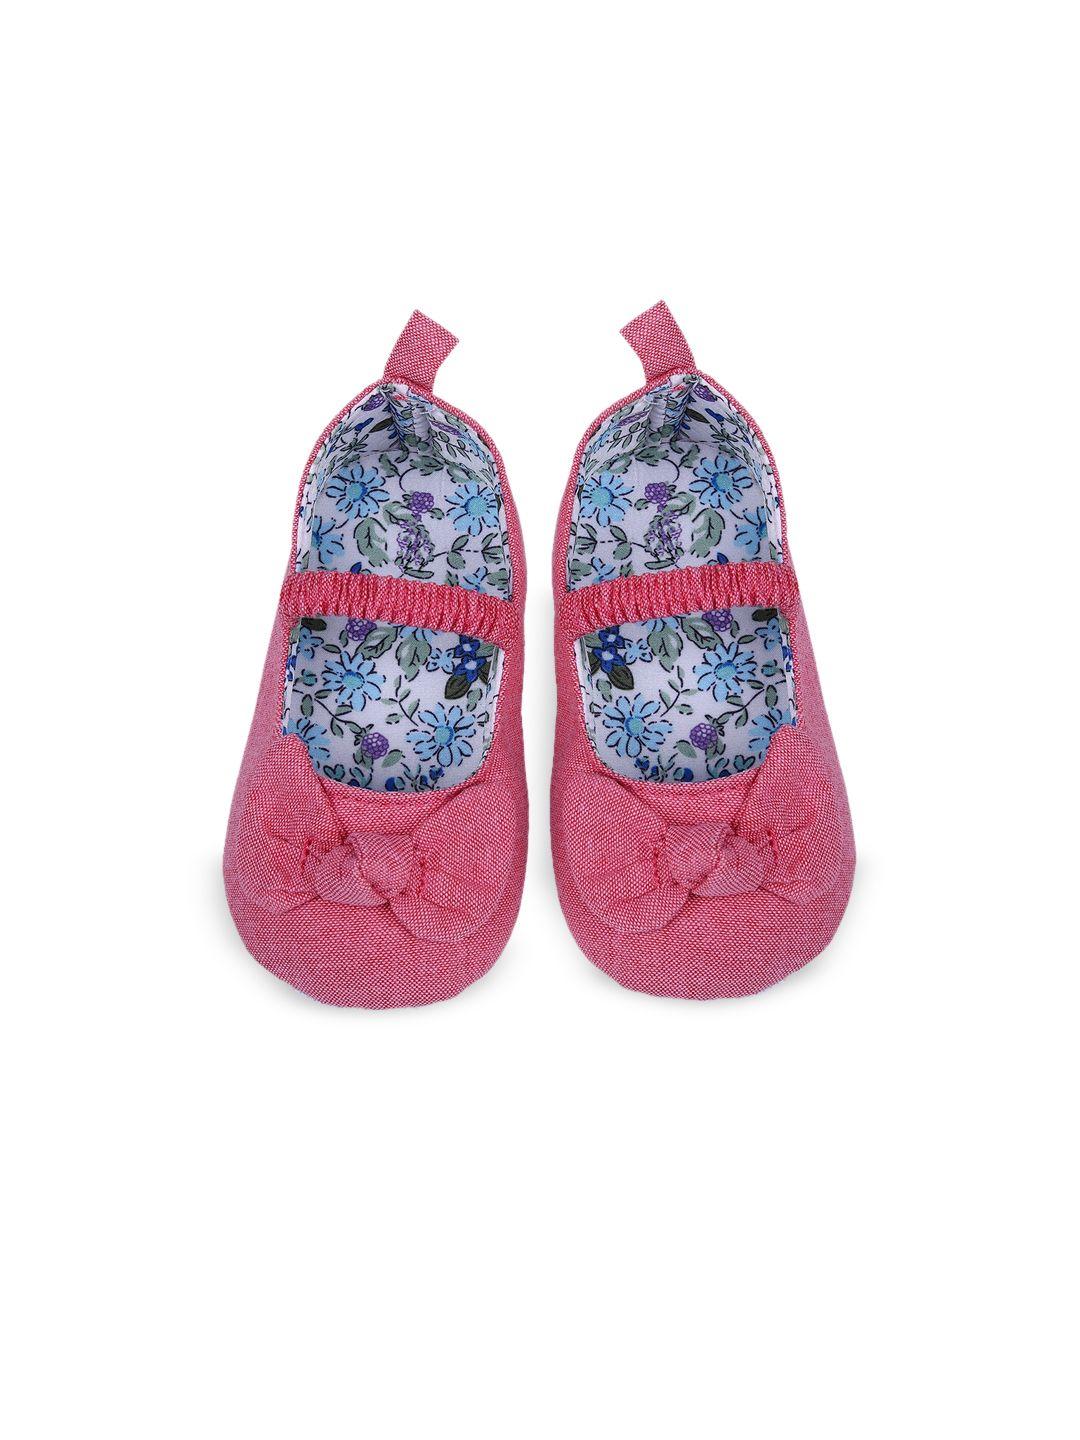 baby moo infant girls peach-colored printed anti-slip cotton booties